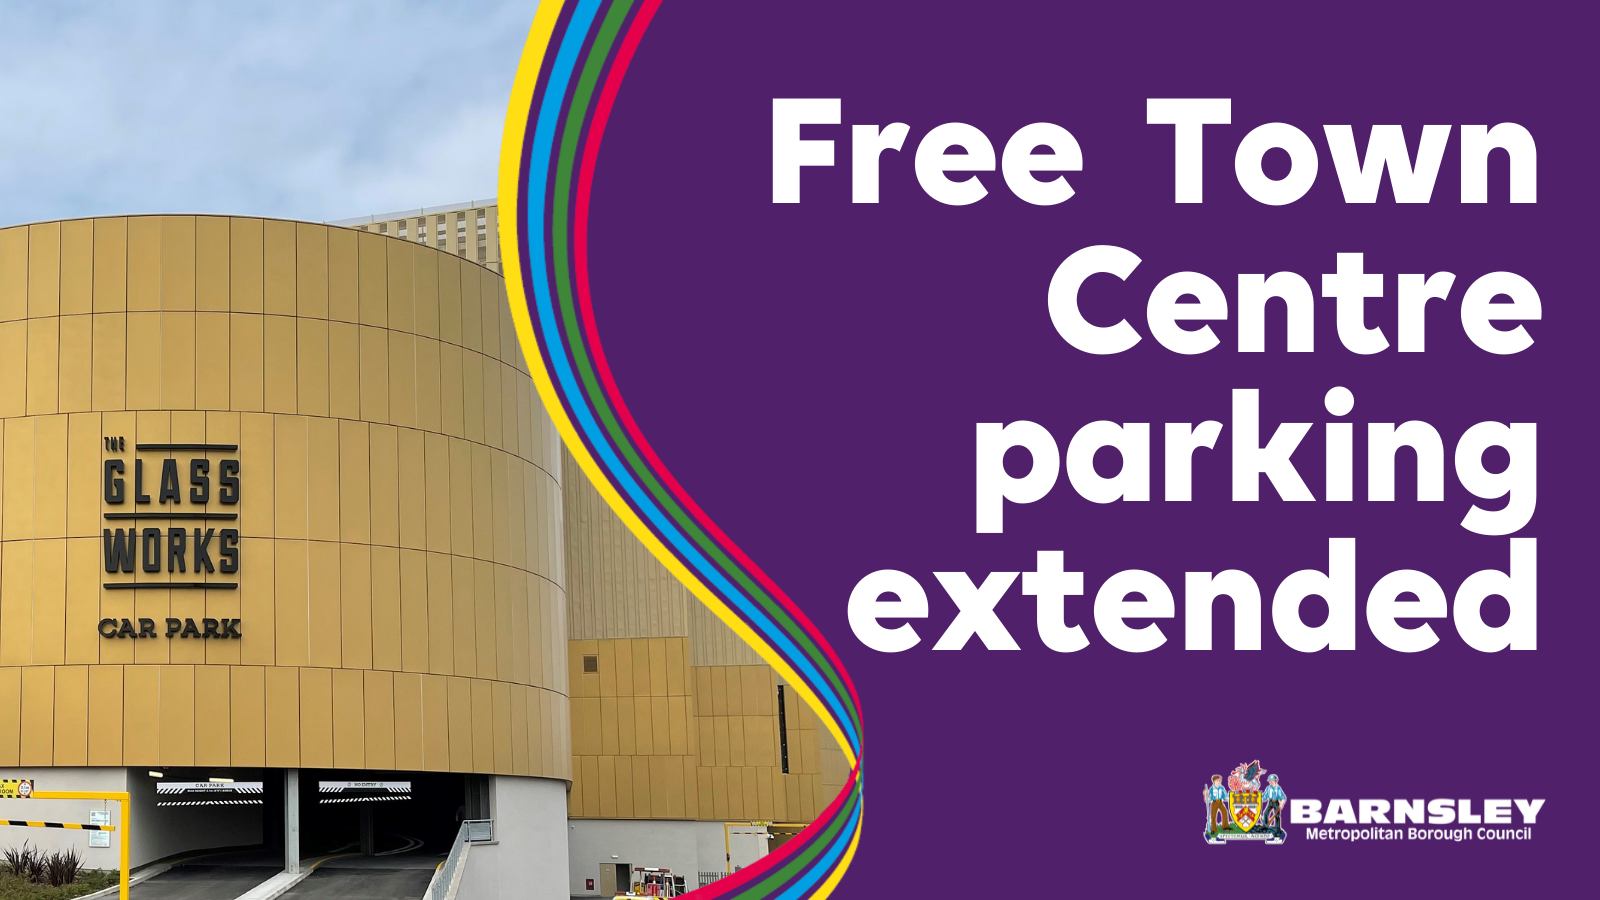 Free town centre parking extended